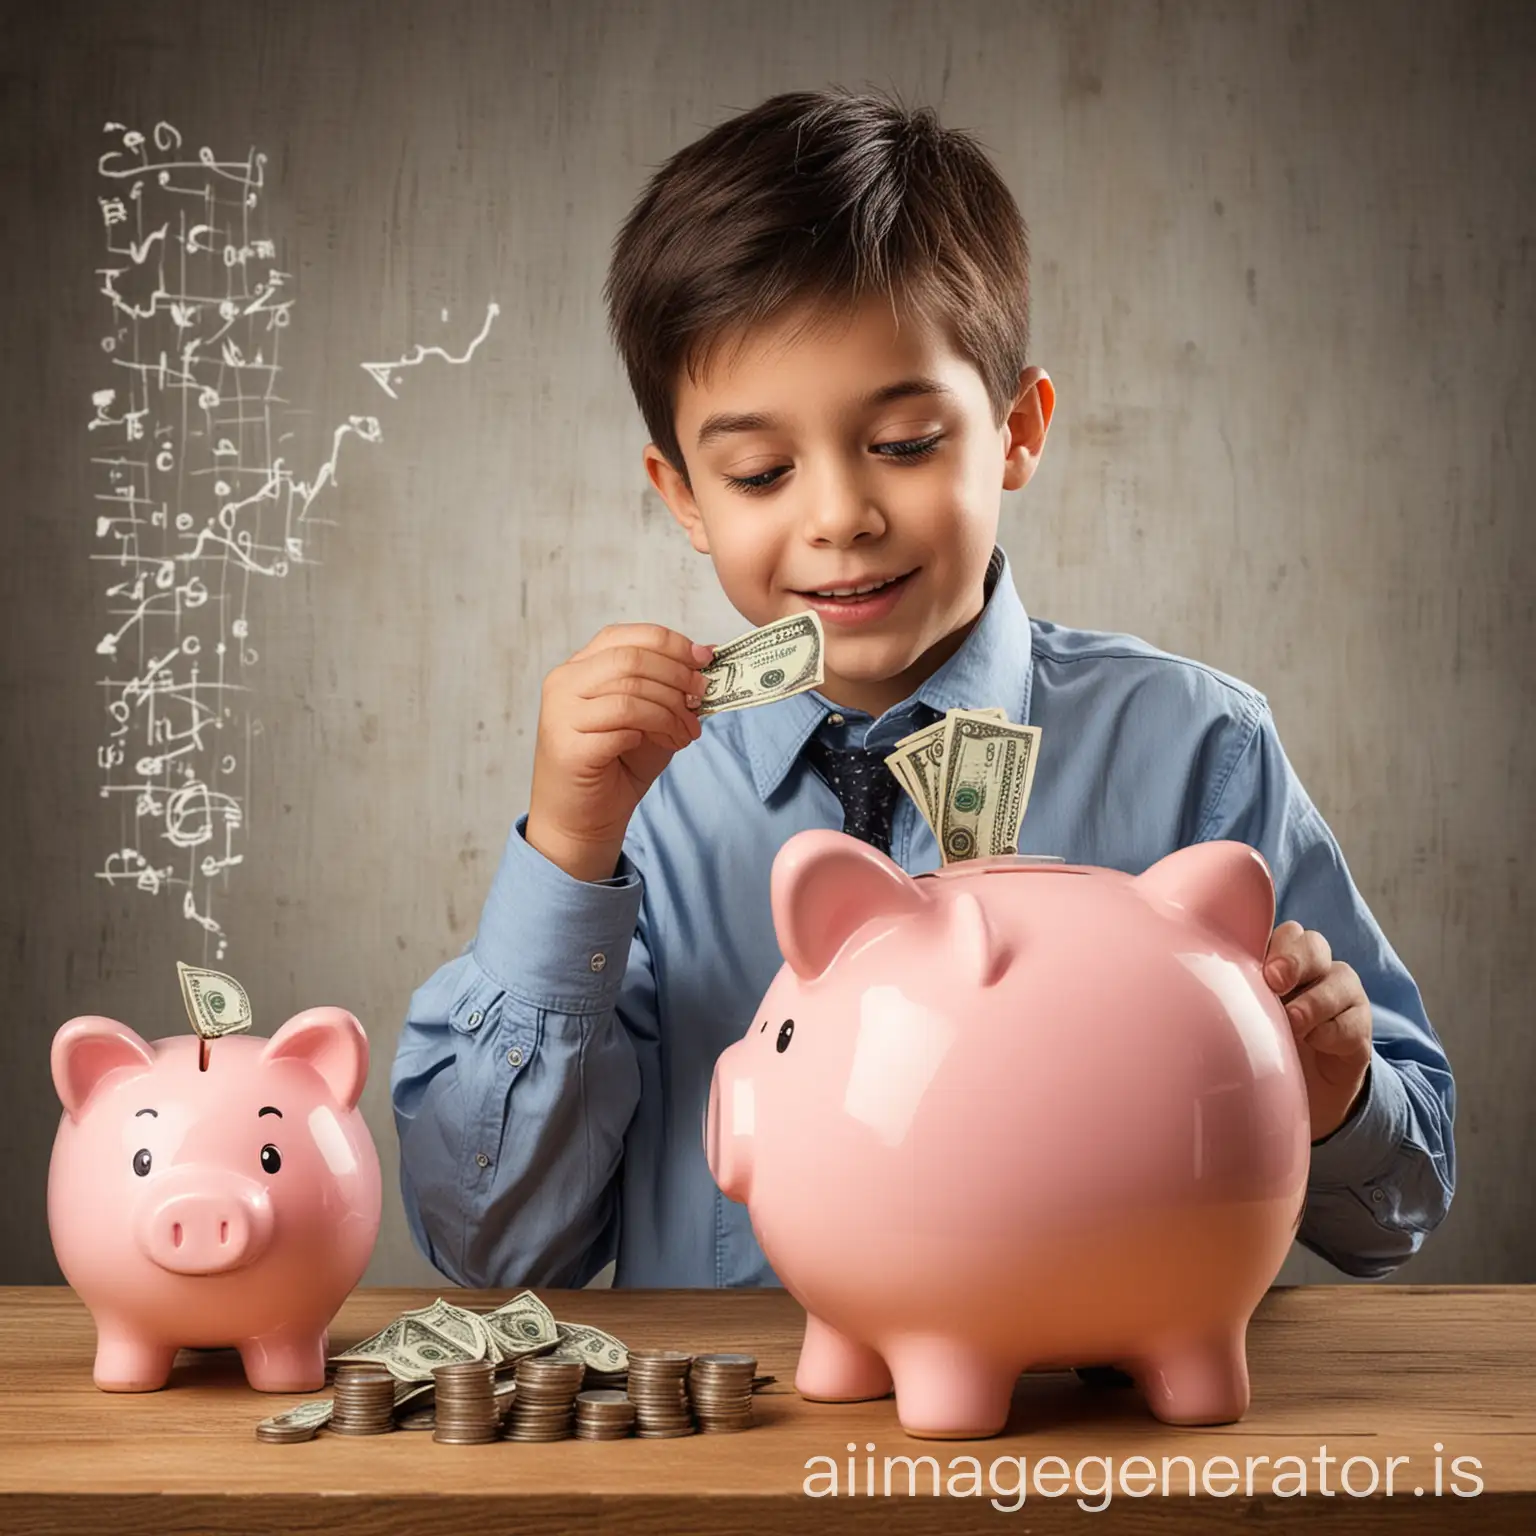 a boy putting his money into piggy bank with stock market background